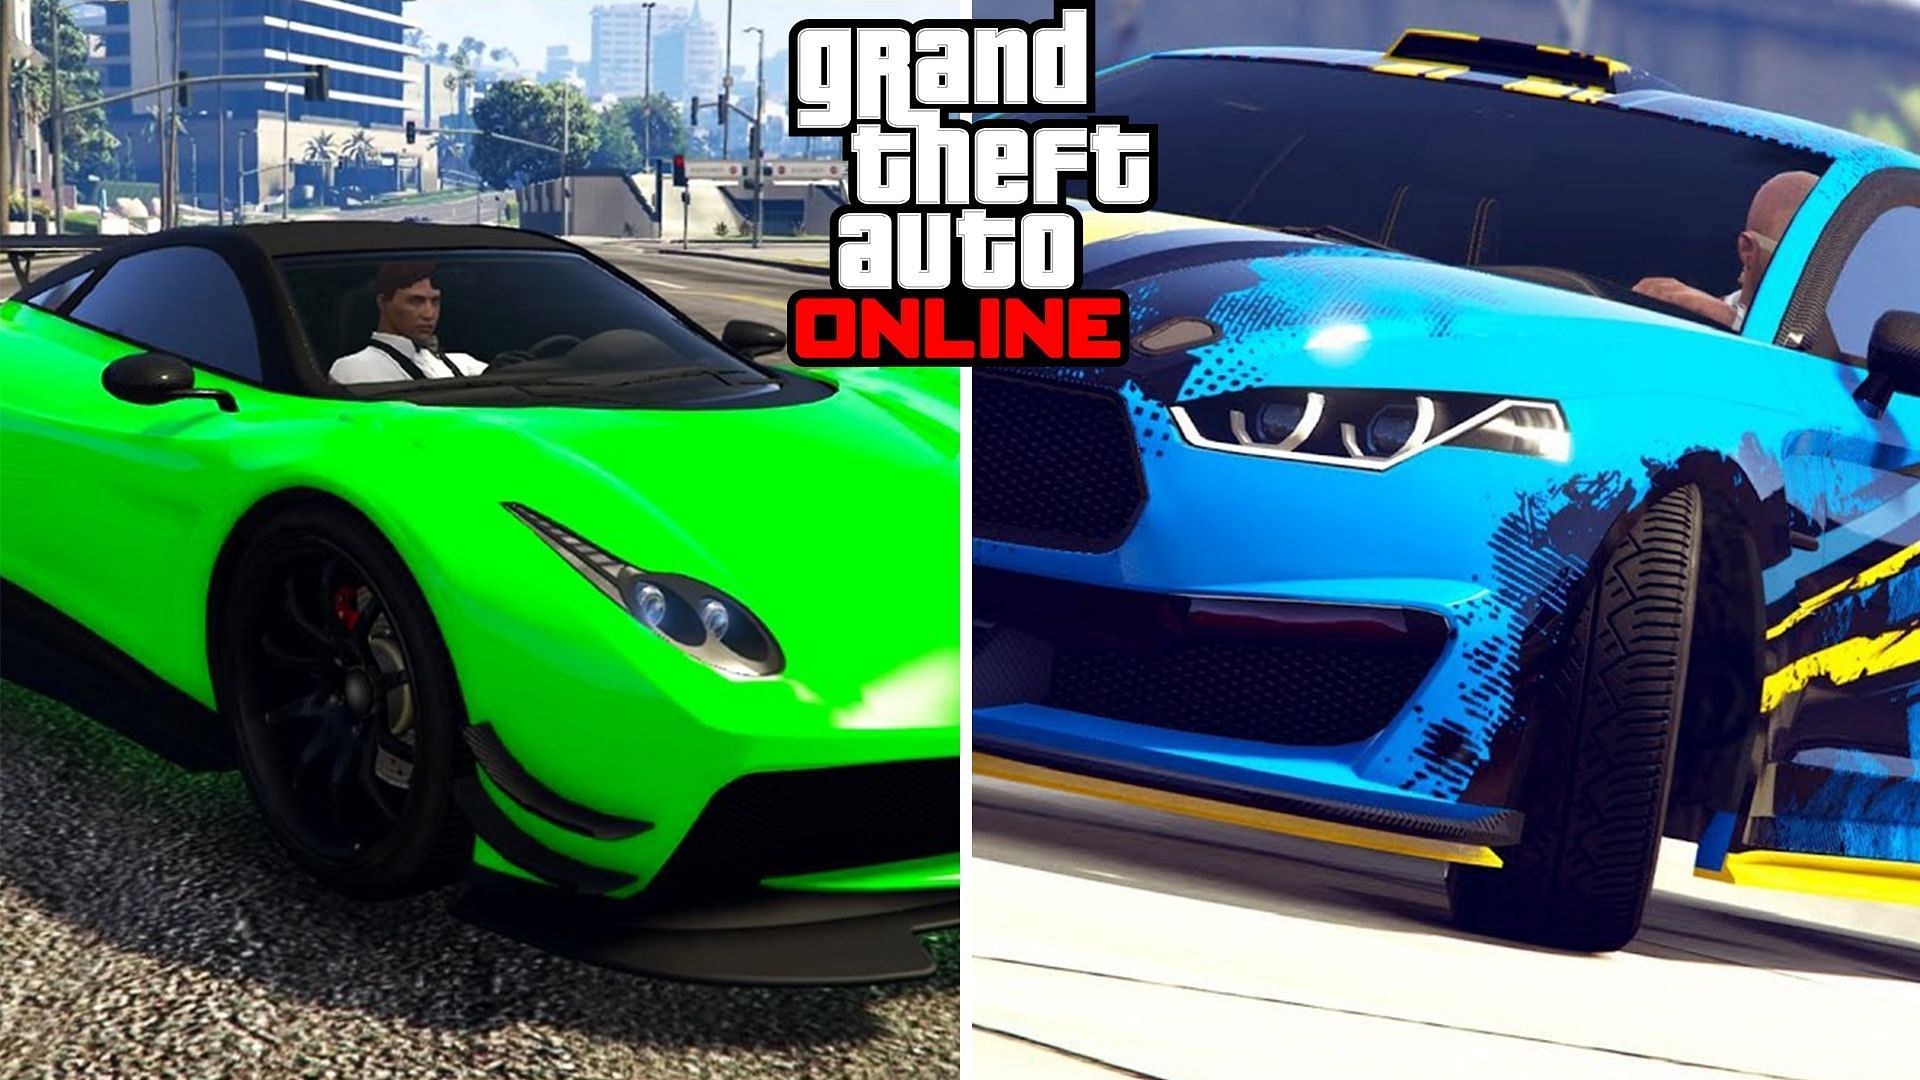 GTA Online now features two new vehicles at the Casino and LS Car Meet (Image via Sportskeeda)